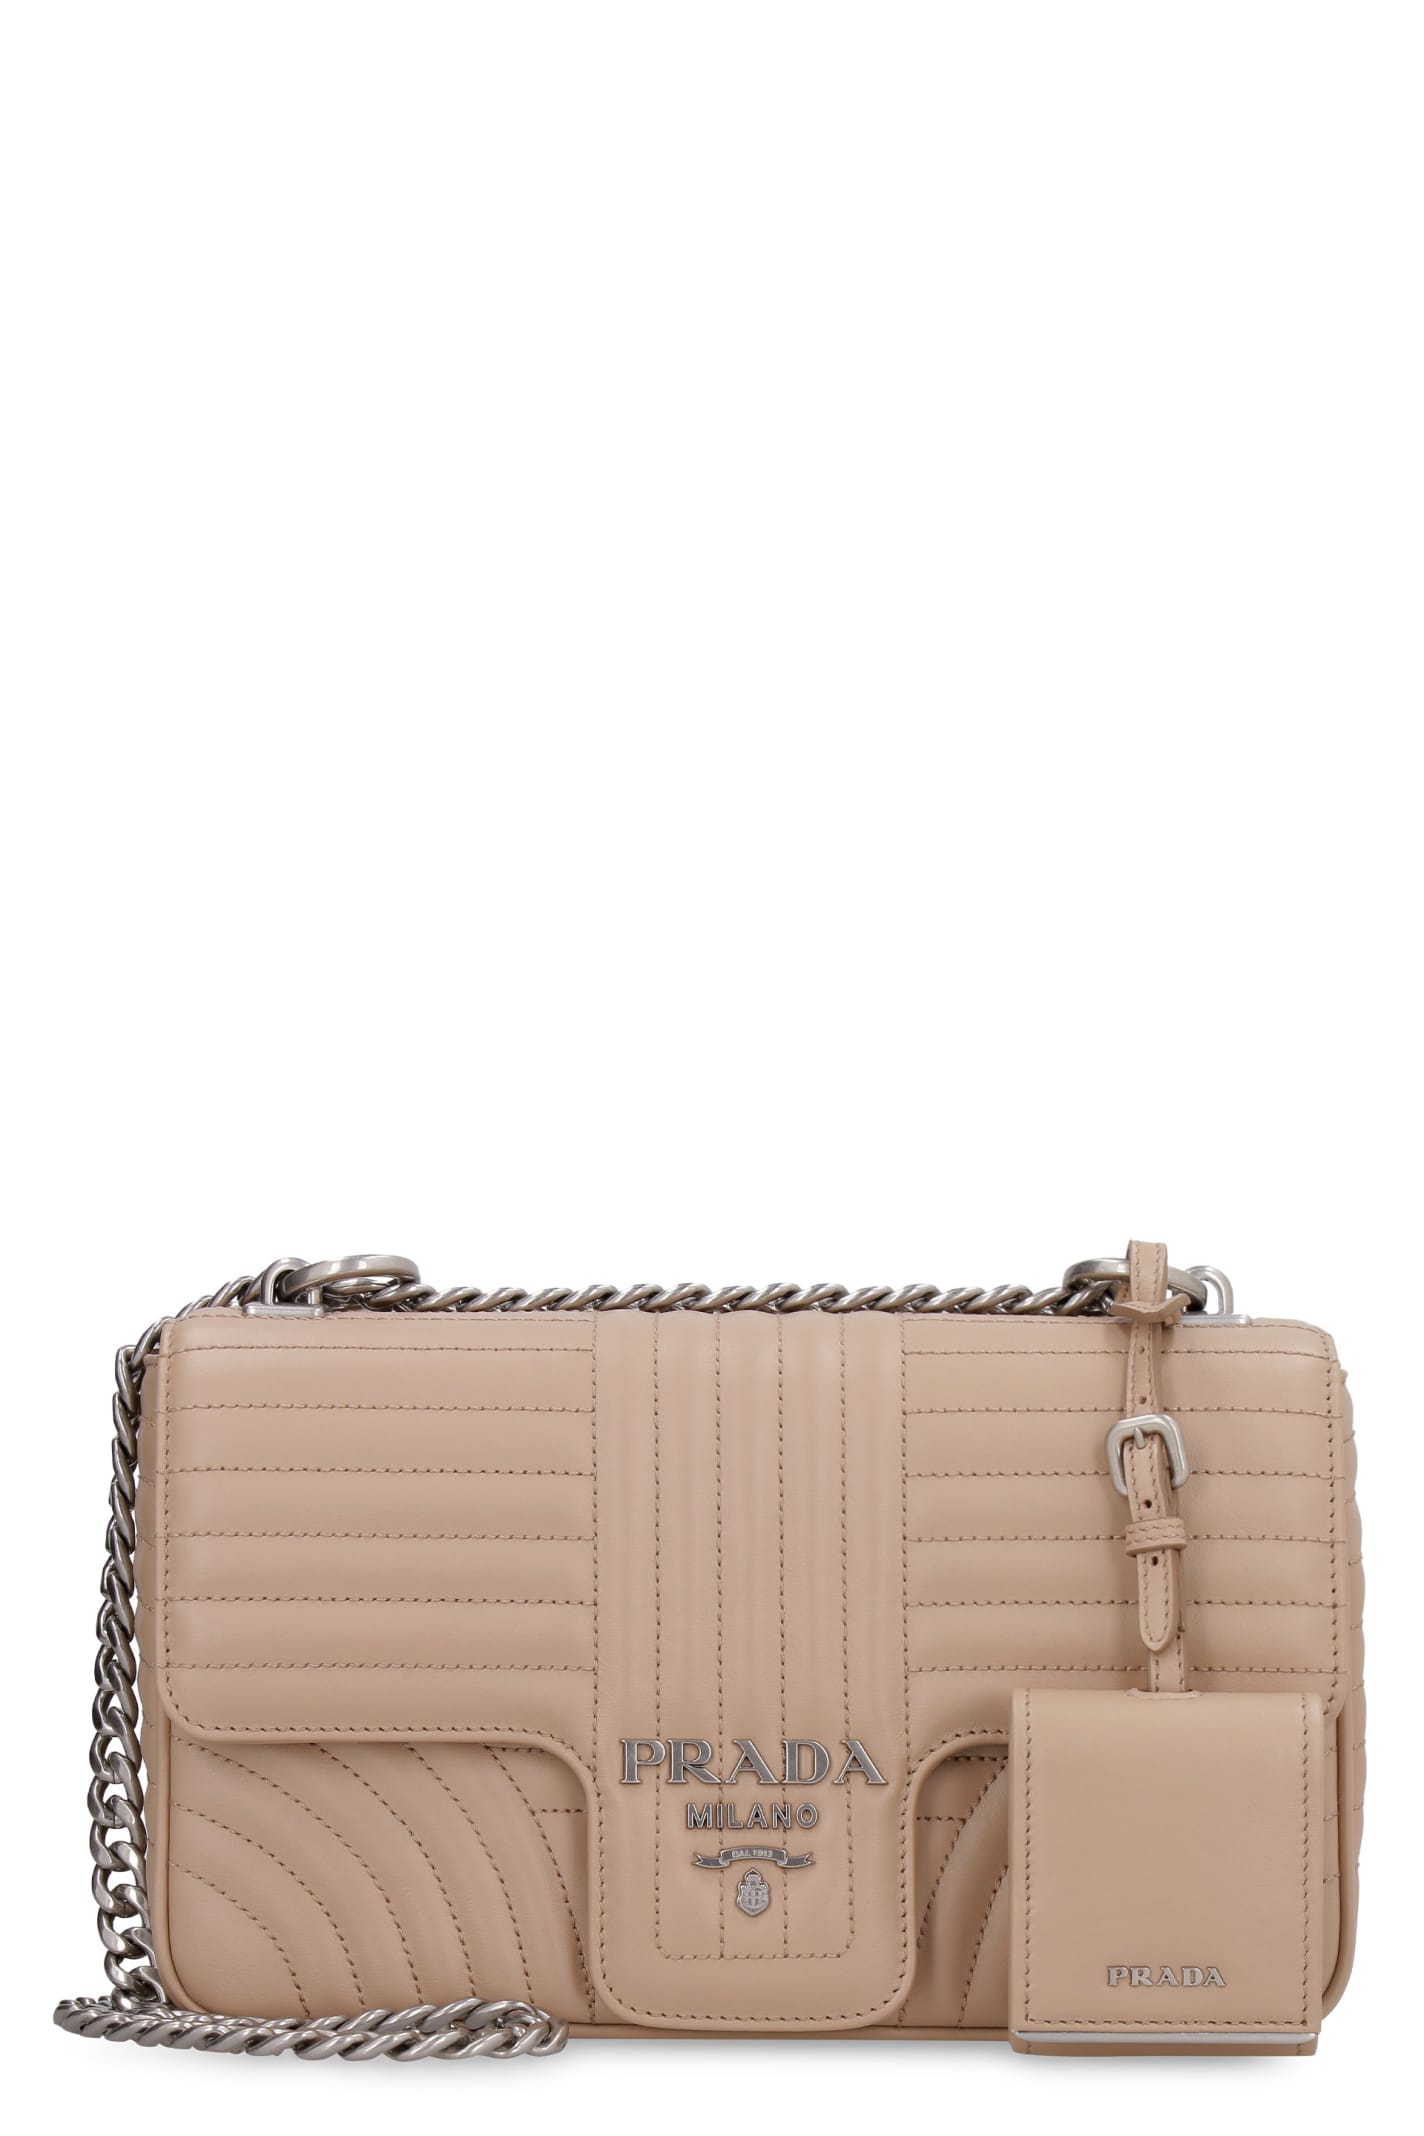 Prada Diagramme Quilted Leather Bag